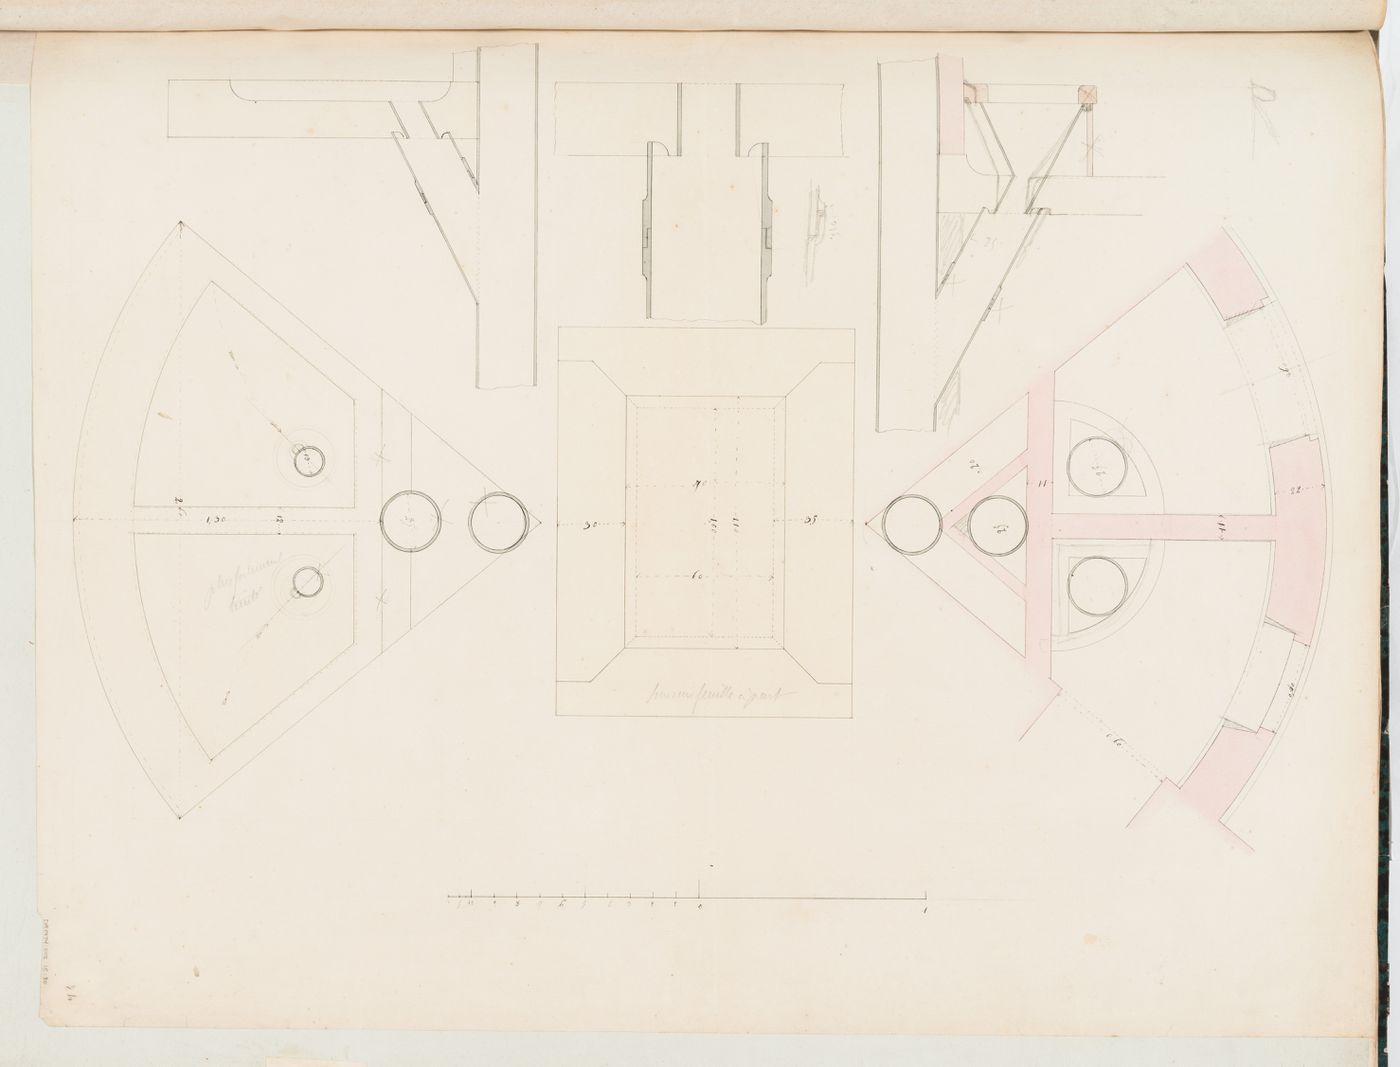 Project for the enlargement of the prison near the Préfecture de police, rue de Jérusalem, Paris: Plans and sections showing the layout for the piping systems and chimney